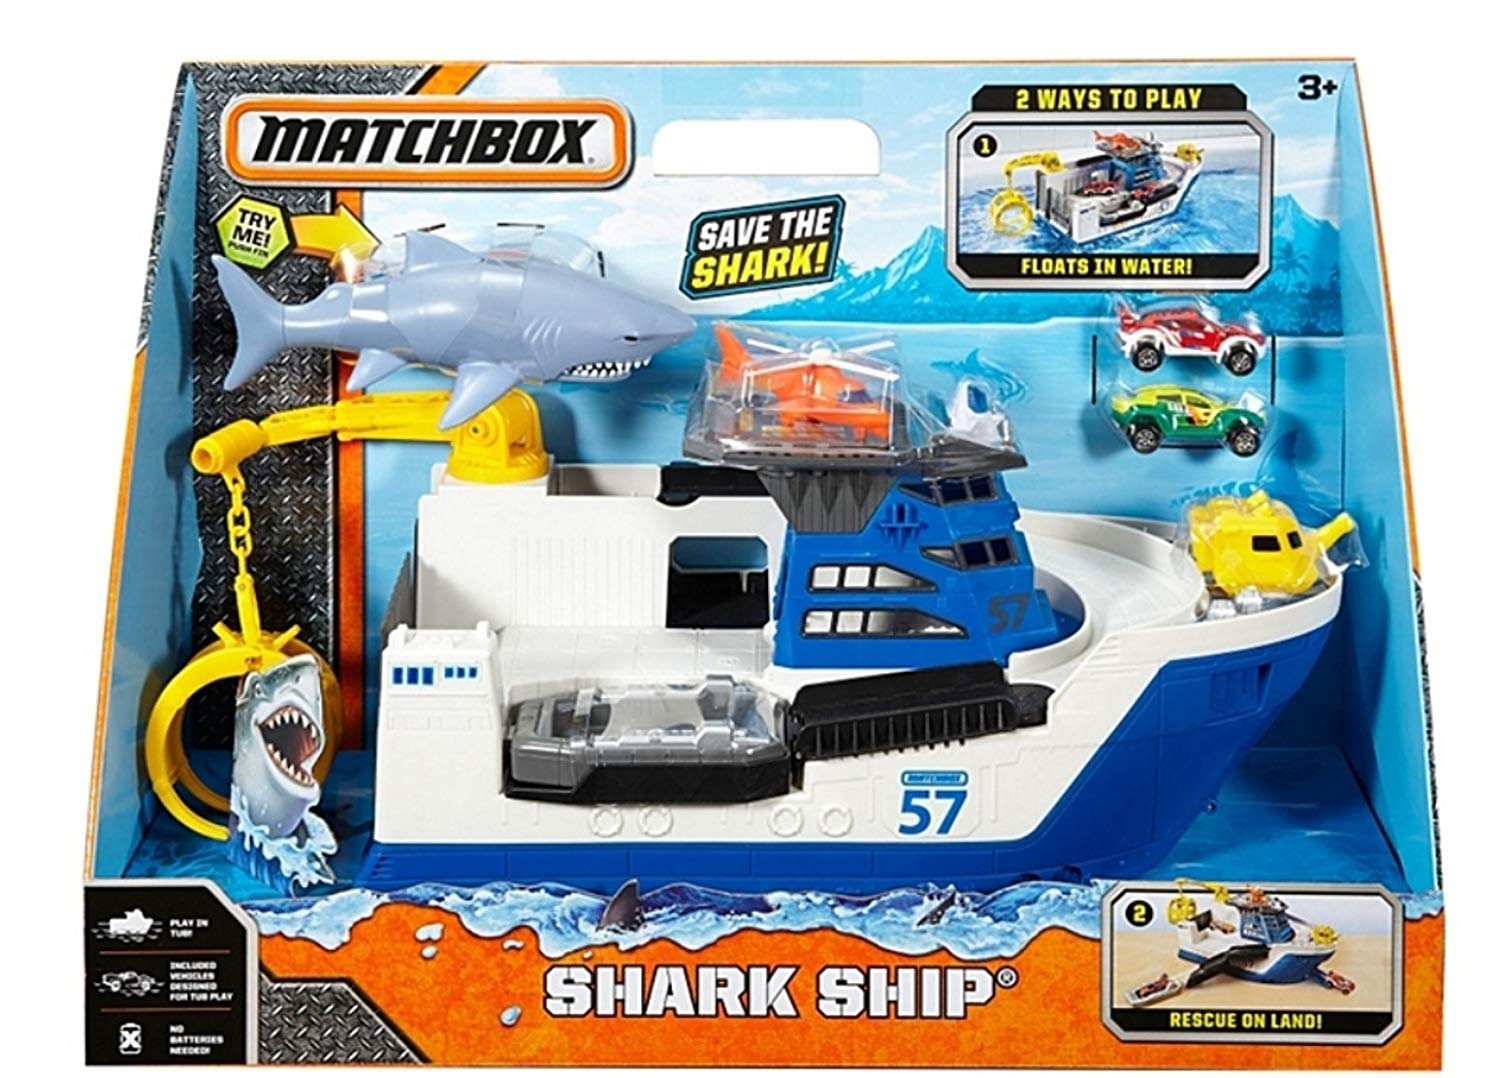 Matchbox Toy  game Mattel Matchbox Mega Rig Shark Adventure - You can connect And combine Your Mega Pieces